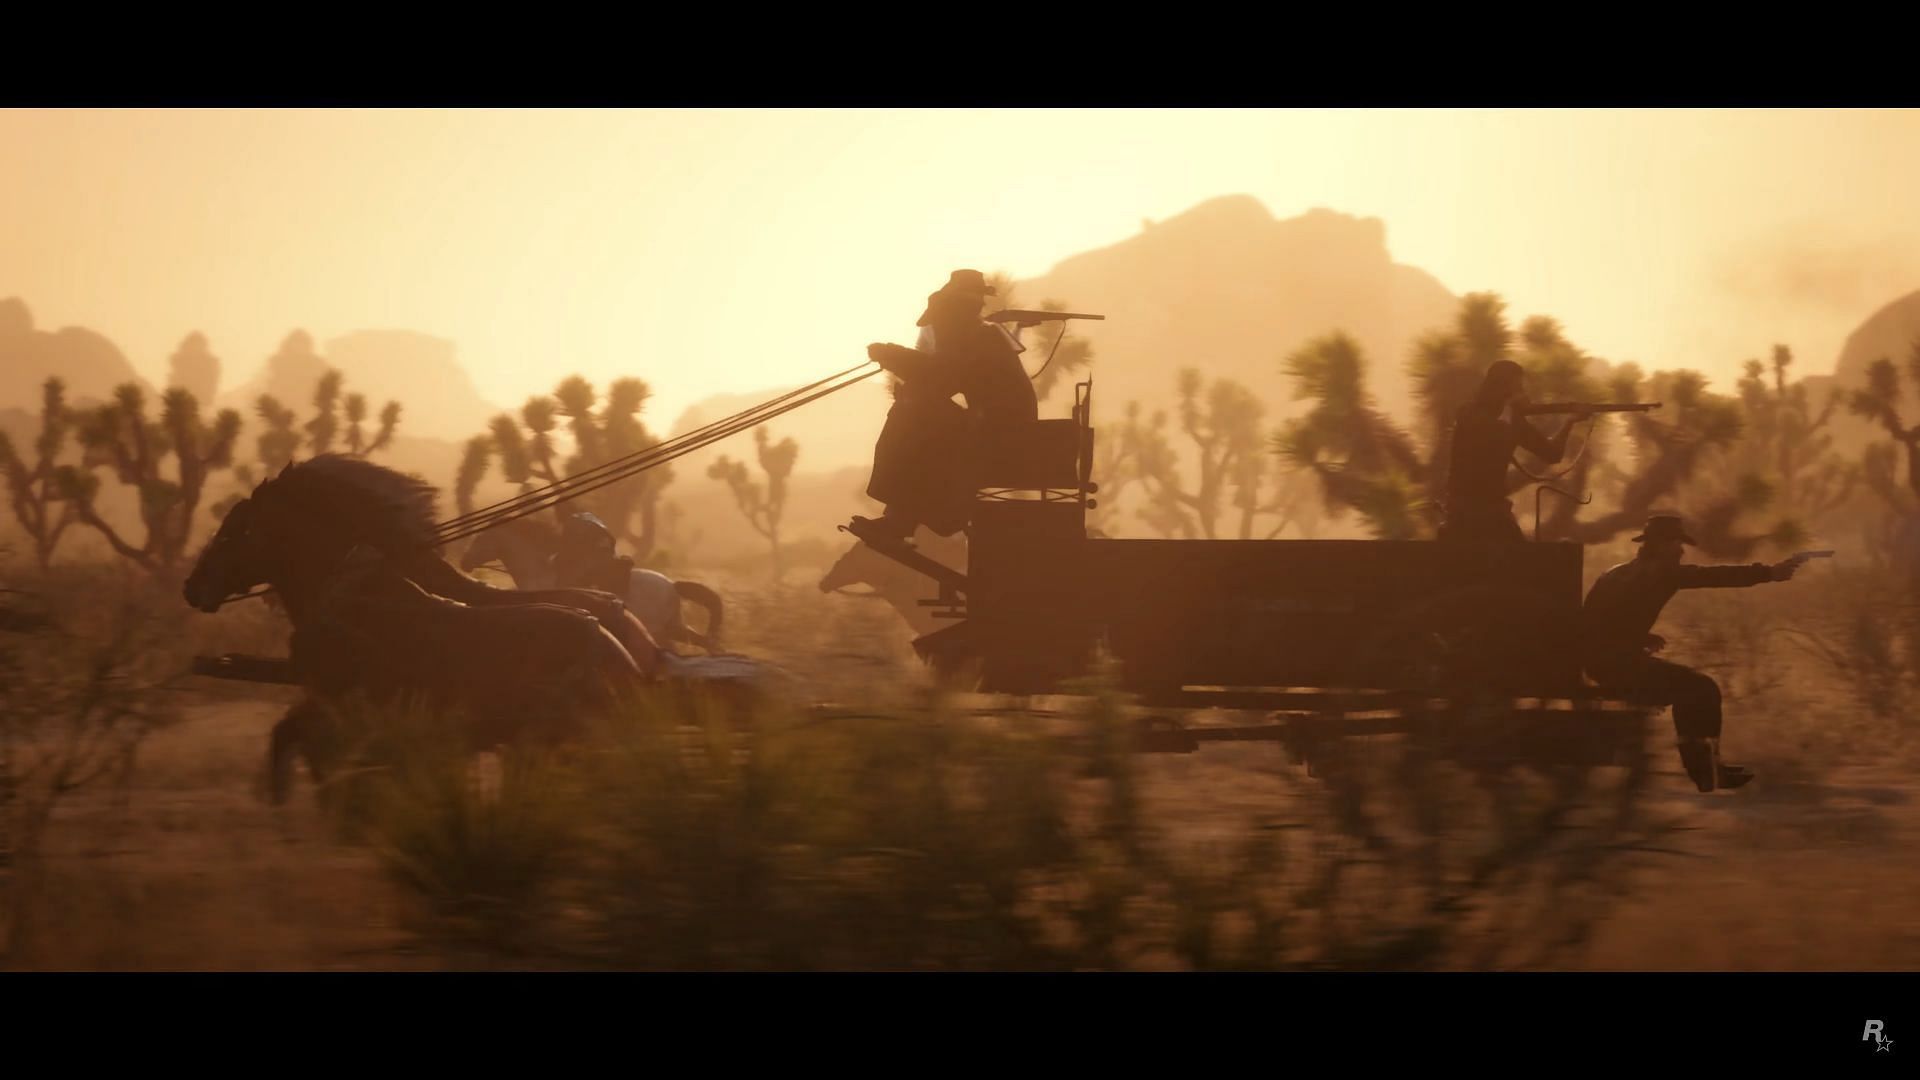 On the run (Image via Red Dead Redemption 2)